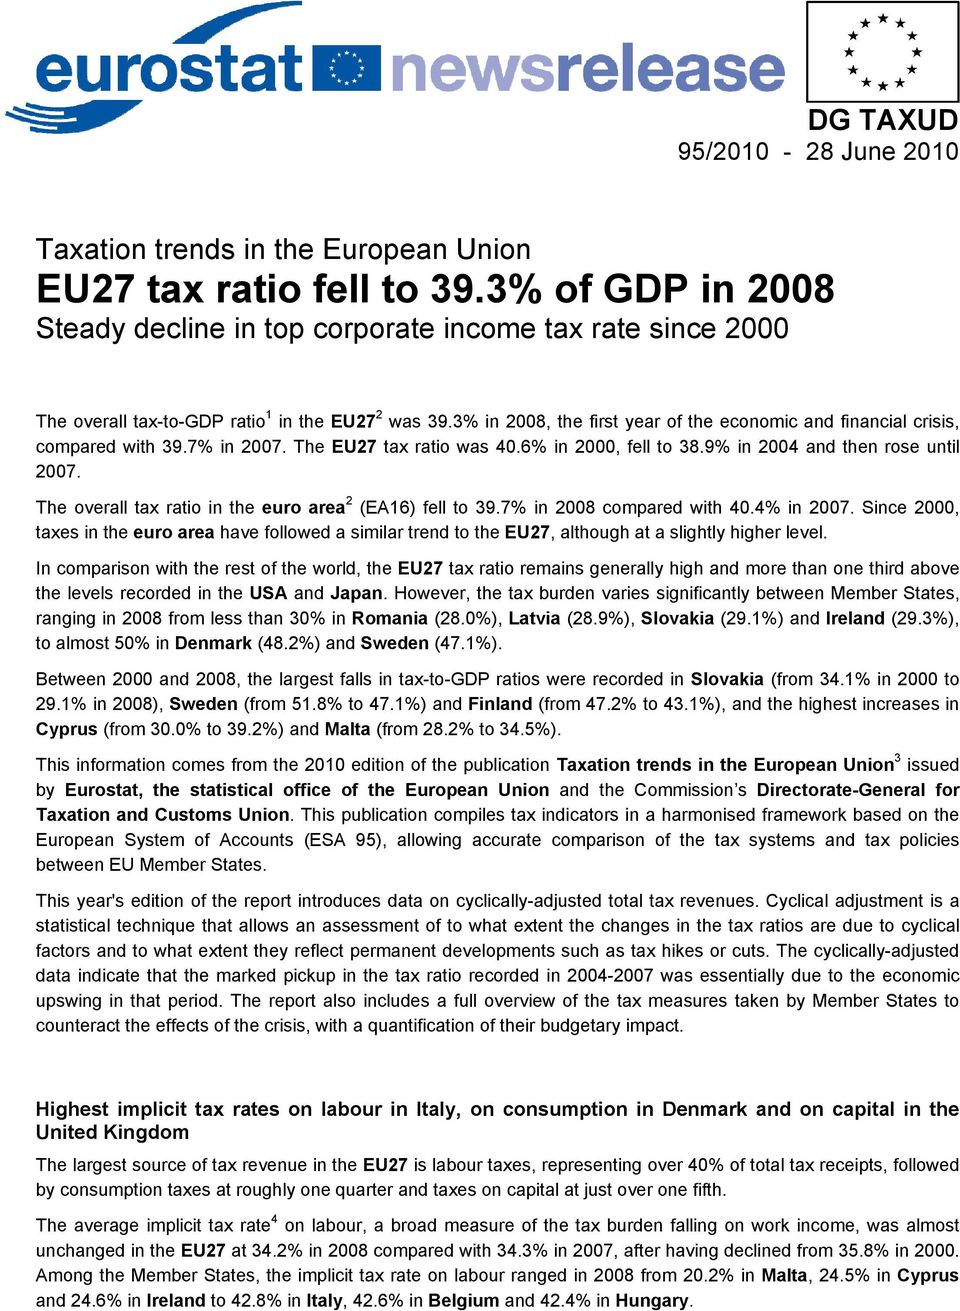 3% in 2008, the first year of the economic and financial crisis, compared with 39.7% in 2007. The EU27 tax ratio was 40.6% in 2000, fell to 38.9% in 2004 and then rose until 2007.